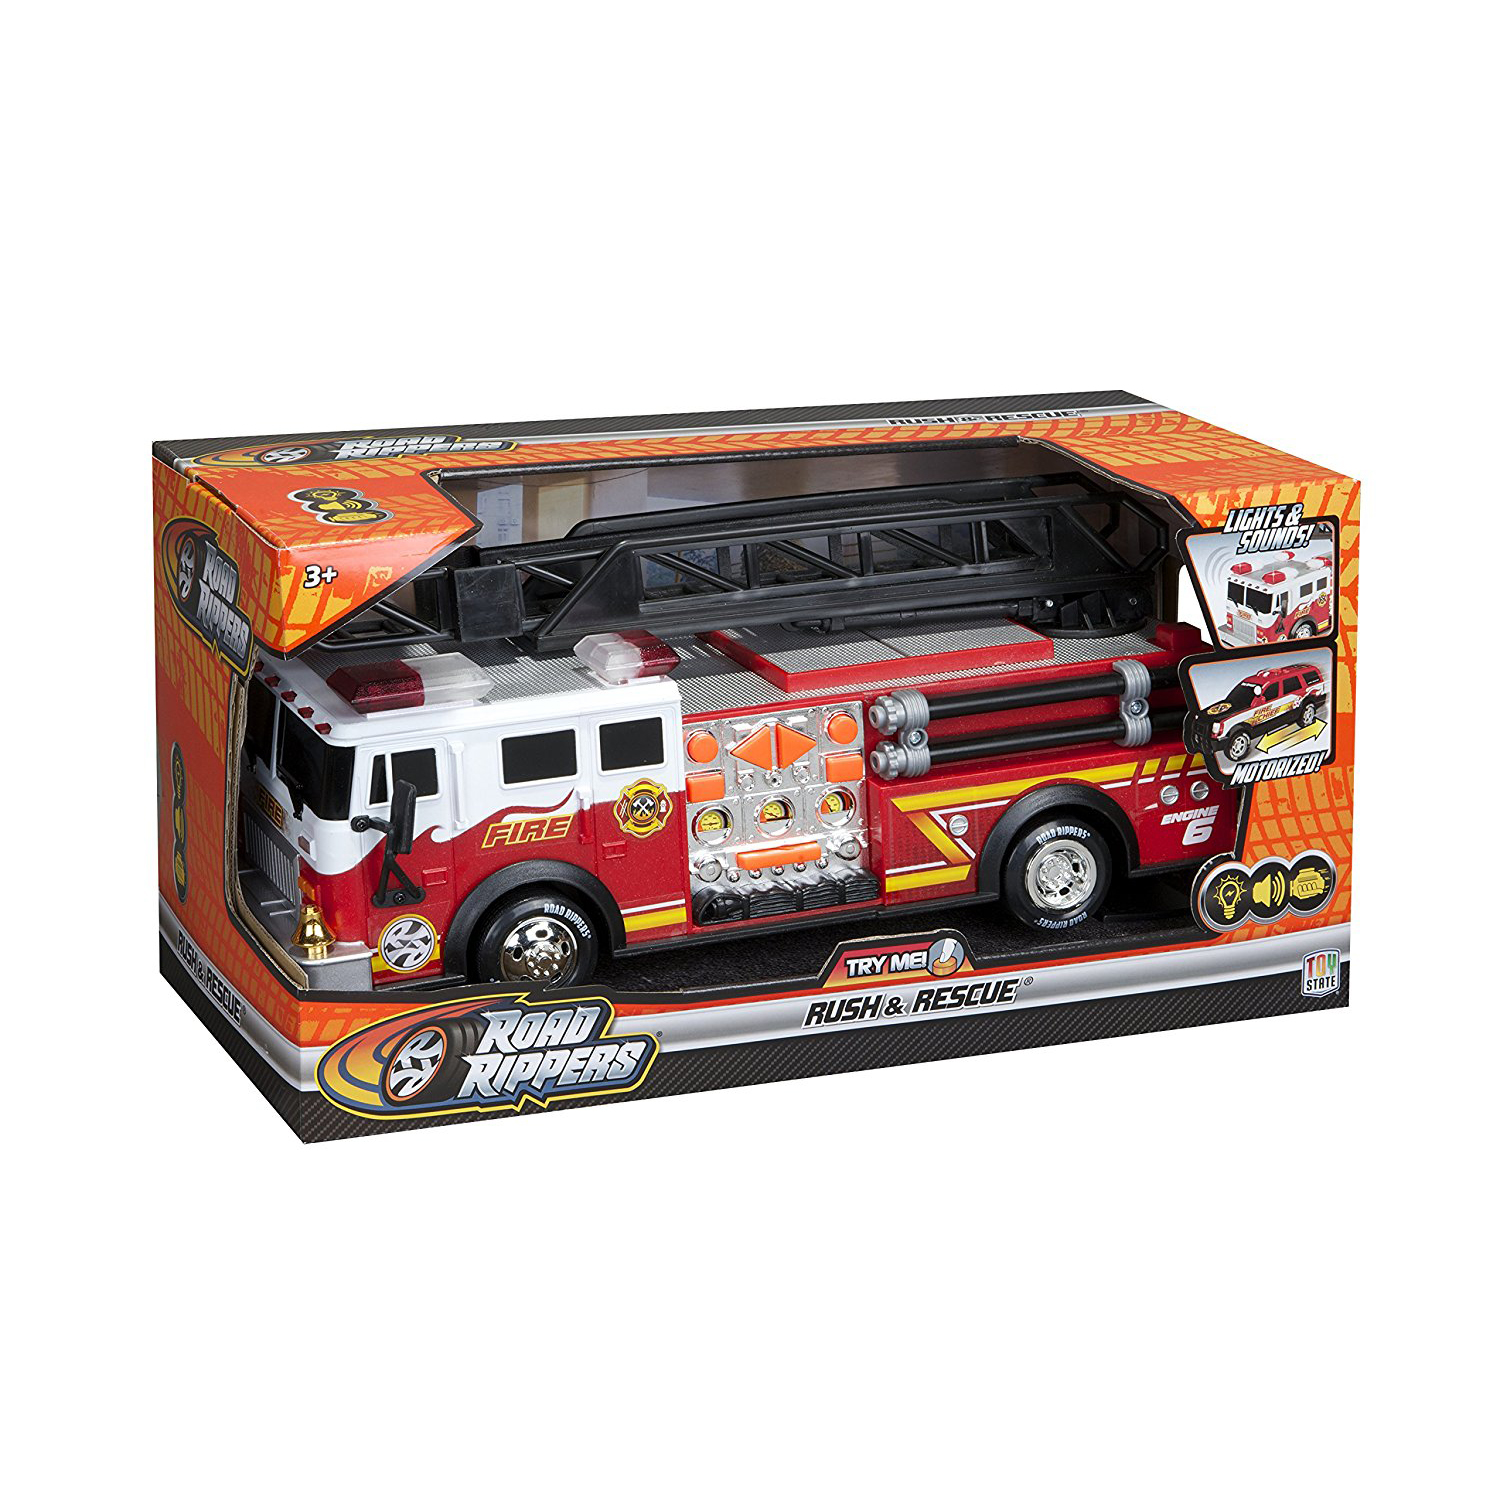 hook and ladder fire truck toy